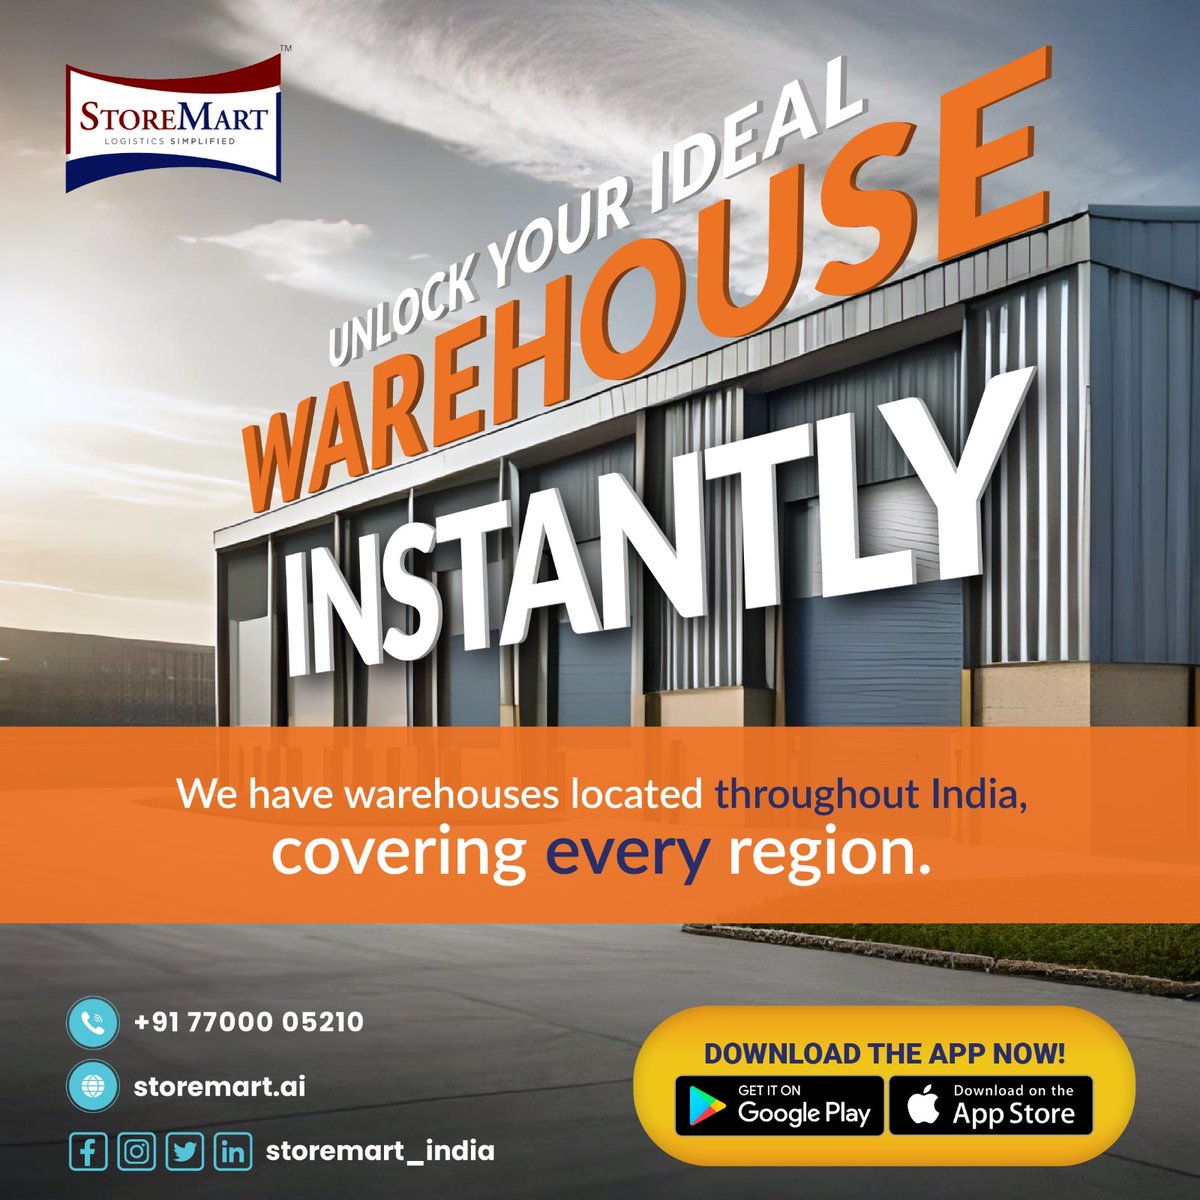 Our warehouses are strategically positioned across India, ensuring comprehensive coverage of every region. Download our app Storemart today!

#warehouse #logistics #Storemart #lease #wms #warehousemanagementsystem #available #warehousing #warehouses
#warehouseapp #storagespace